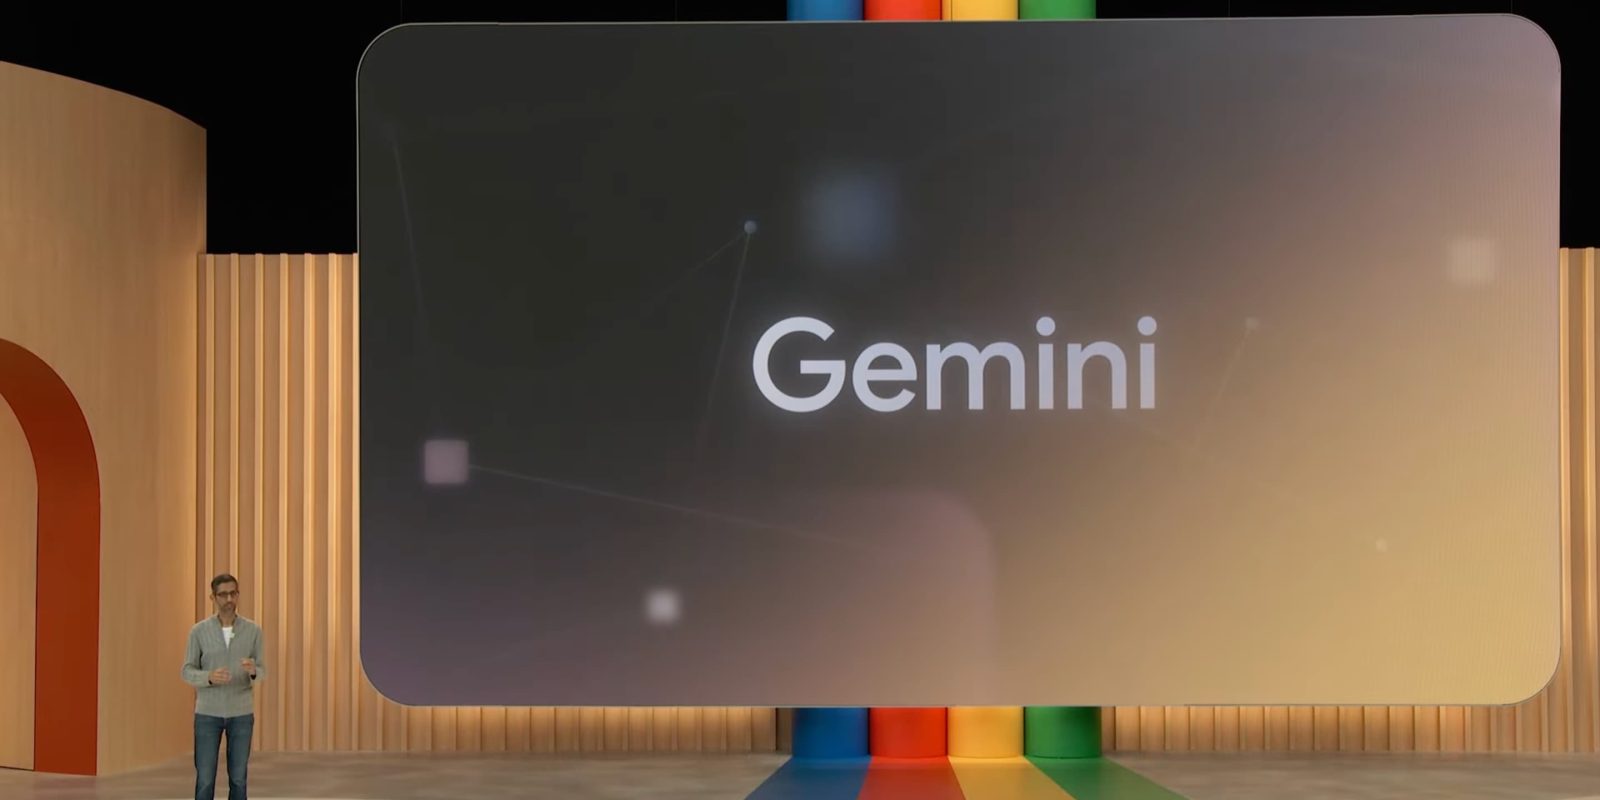 Apple reportedly still in talks to use Gemini for iPhone AI features as OpenAI deal looms